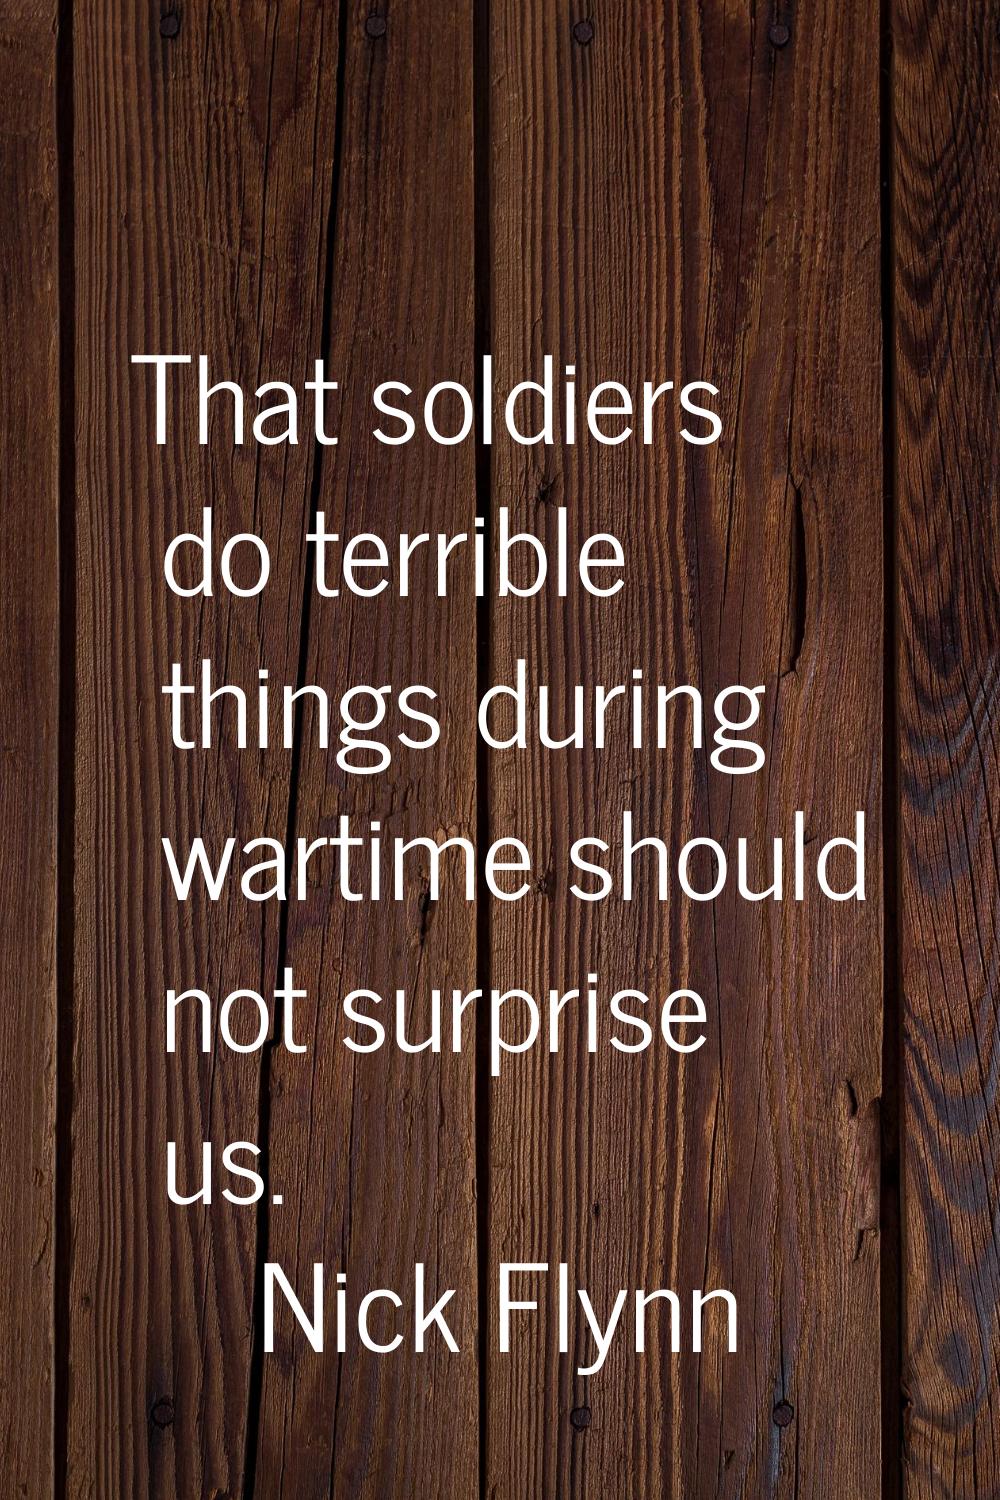 That soldiers do terrible things during wartime should not surprise us.